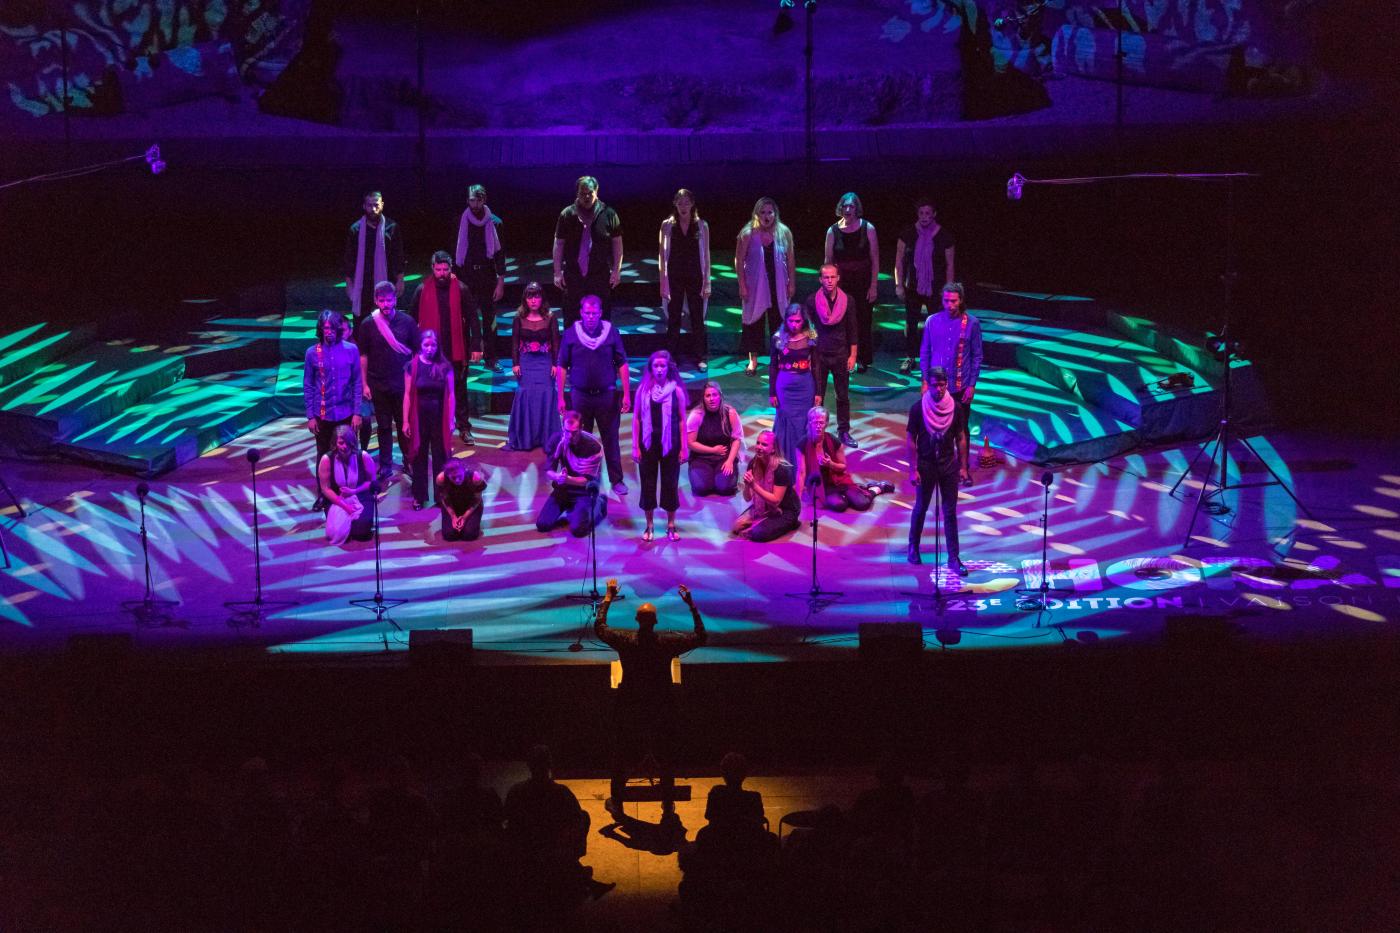 On a spotlight stage, a conductor leads a group of singers in various poses.